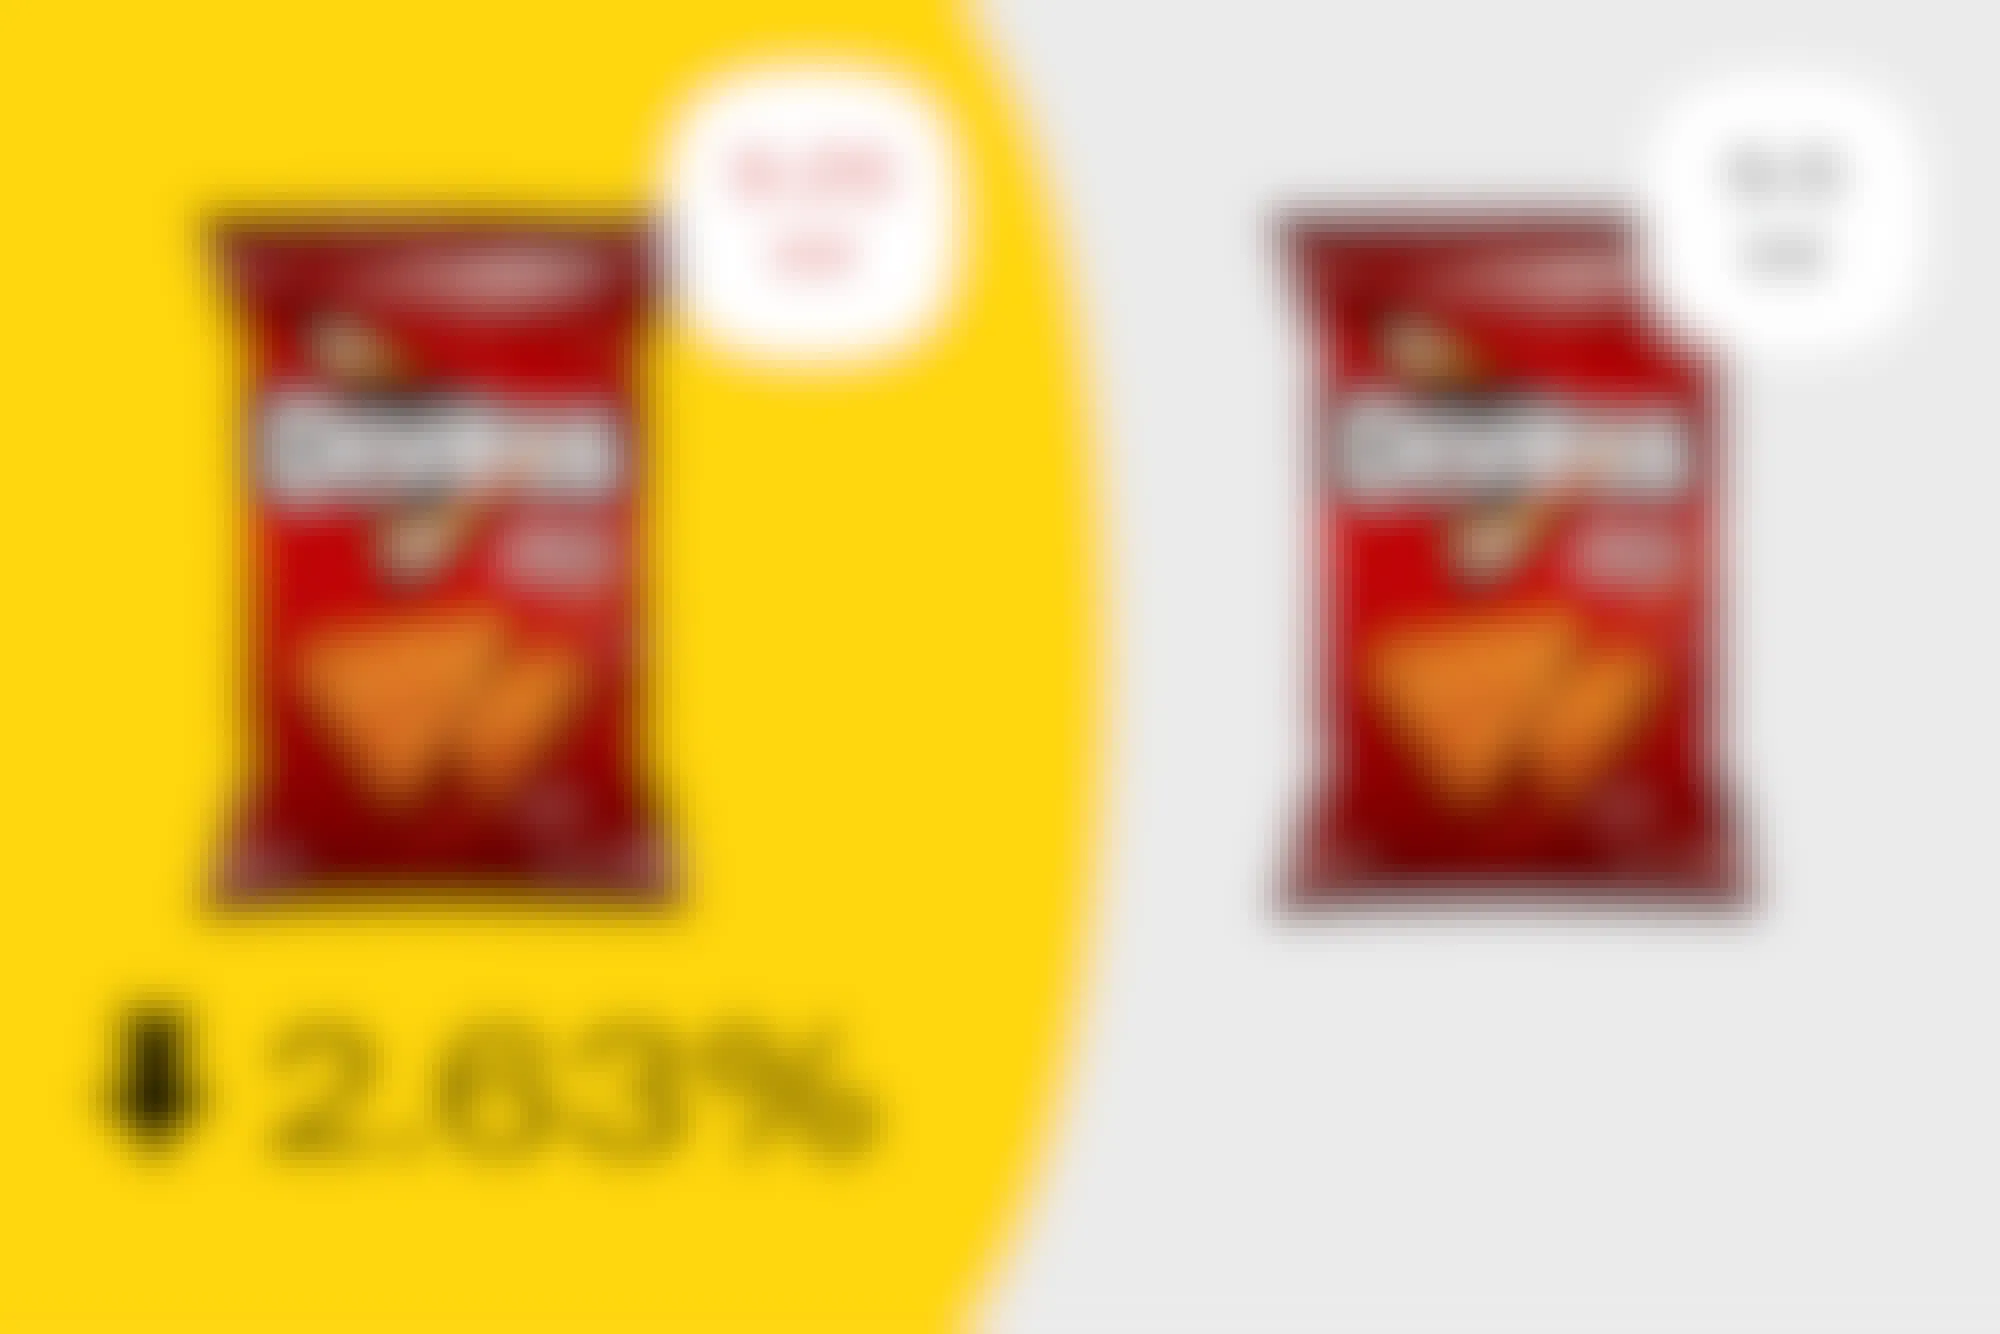 Graphic showing how Doritos is now 2.63%% smaller thanks to shrinkflation